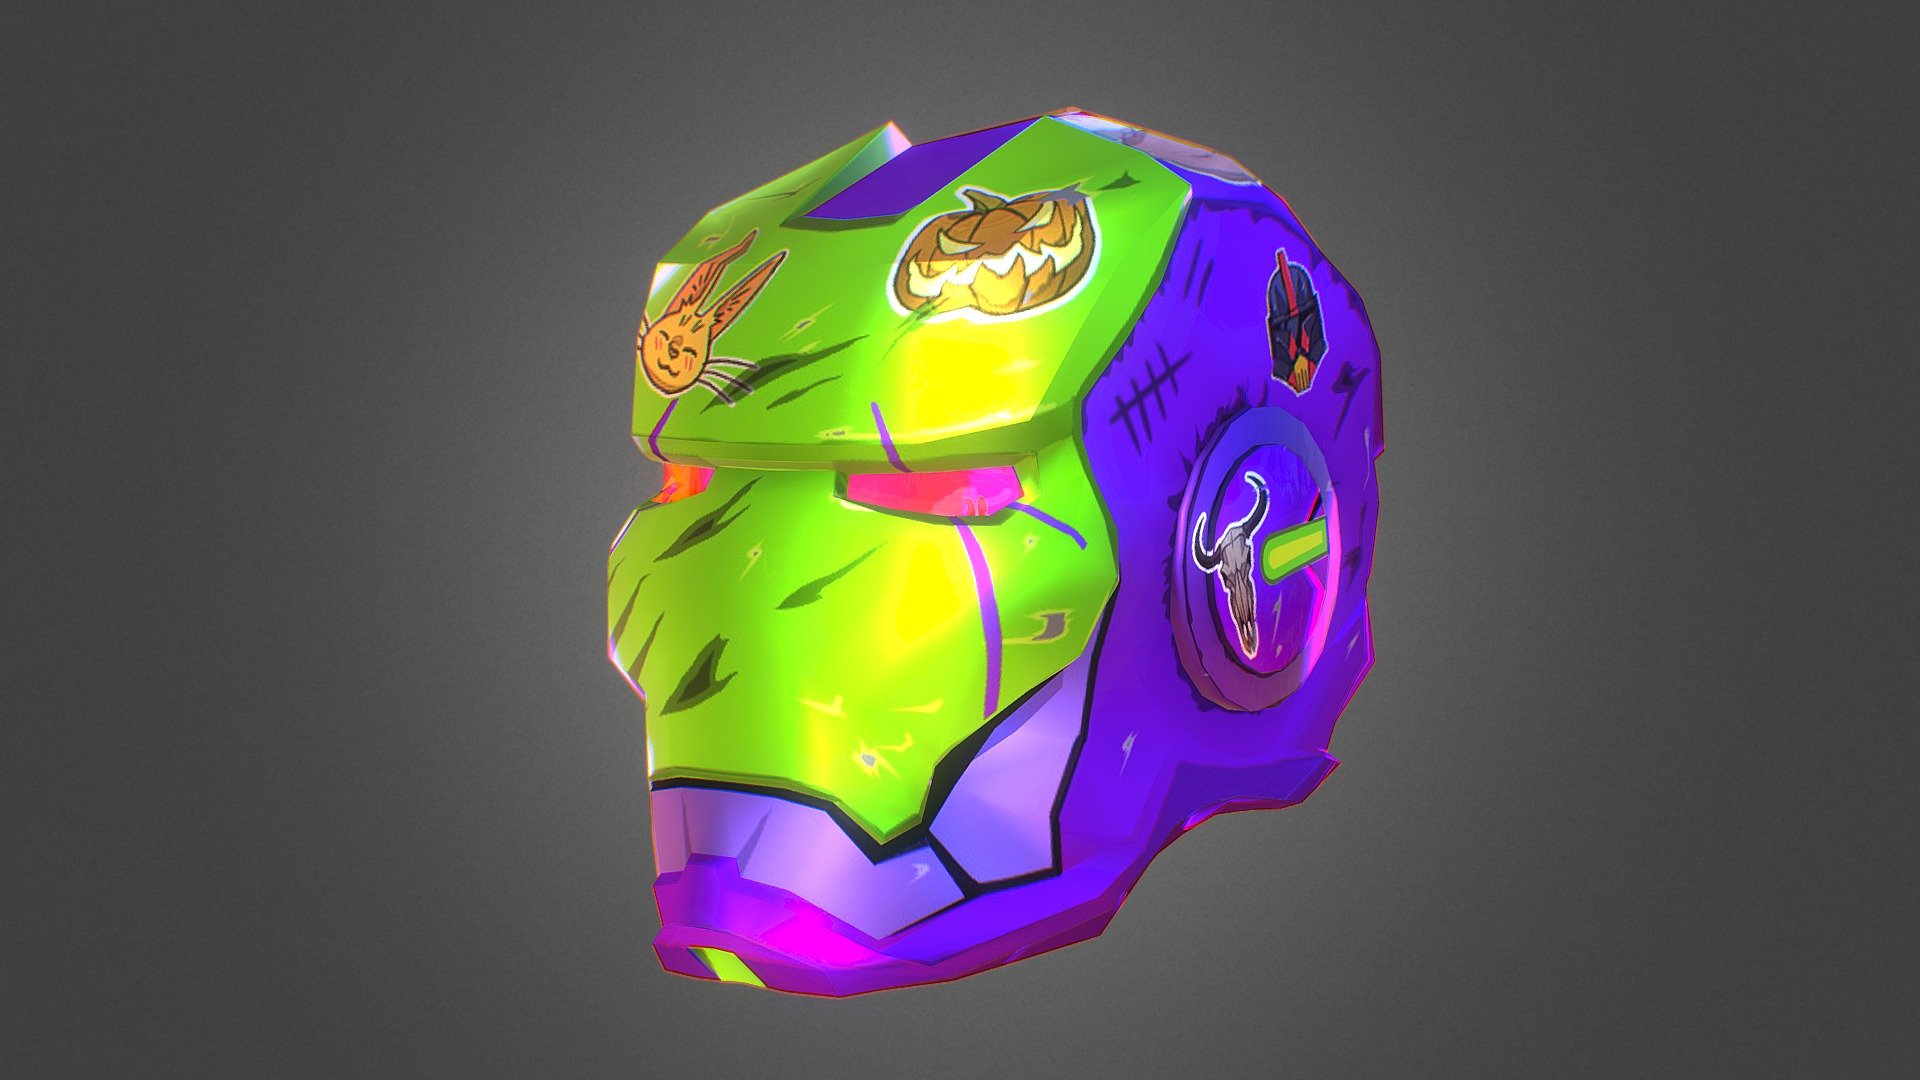 Ironman Helmet  for a University project 😺👌💖💖💖

Software: 3ds Max

Instagram:yourejustjellyfish

artstation:  yourejustjellyfish

twitter:imjustjellyfish - Ironman Helmet - 3D model by yourejustjellyfish 3d model